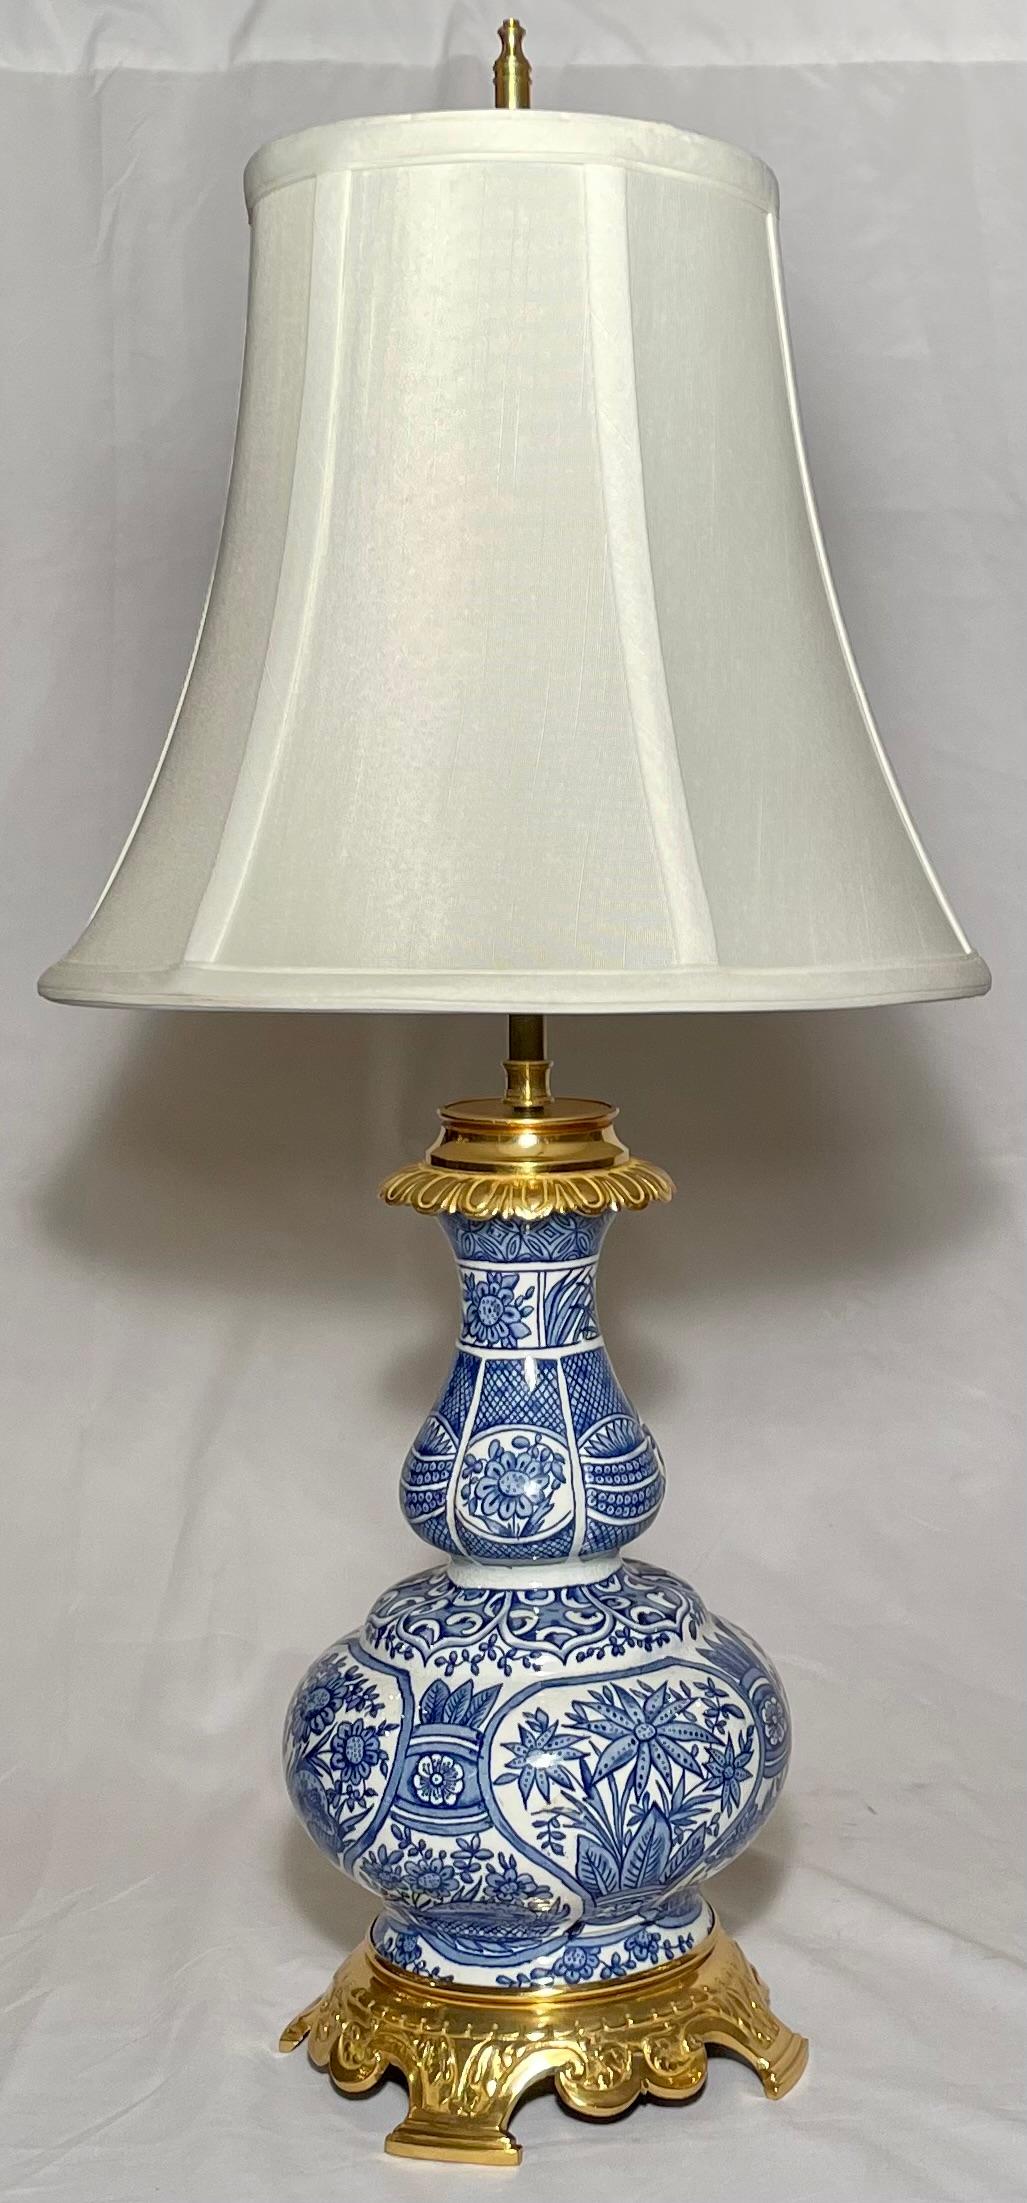 Pair antique French faience lamps, circa 1900.